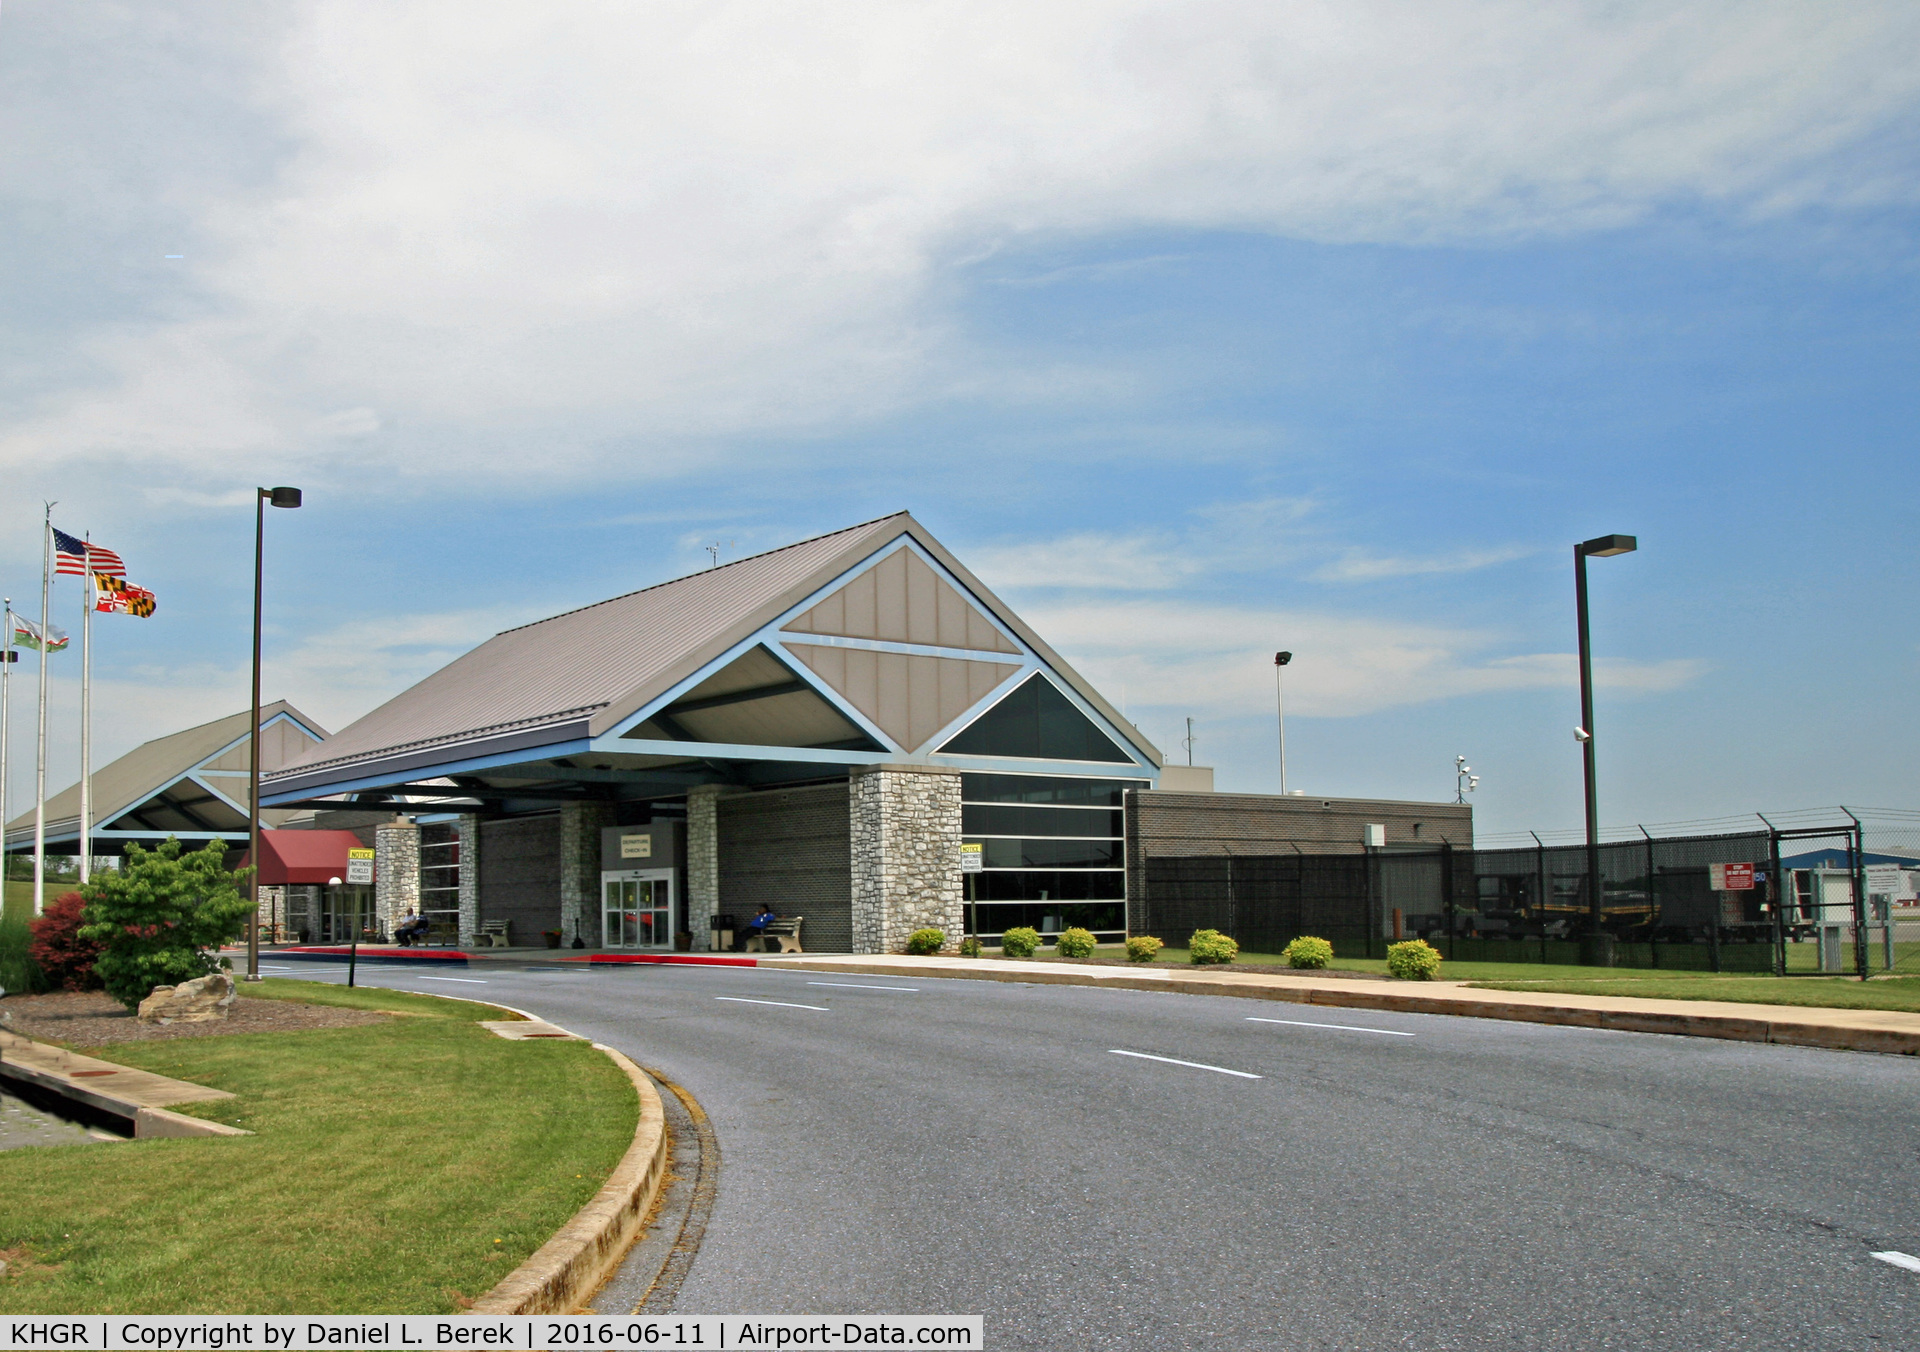 Hagerstown Rgnl-richard A Henson Fld Airport (HGR) - This is the passenger terminal of Hagerstown Regional Airport.